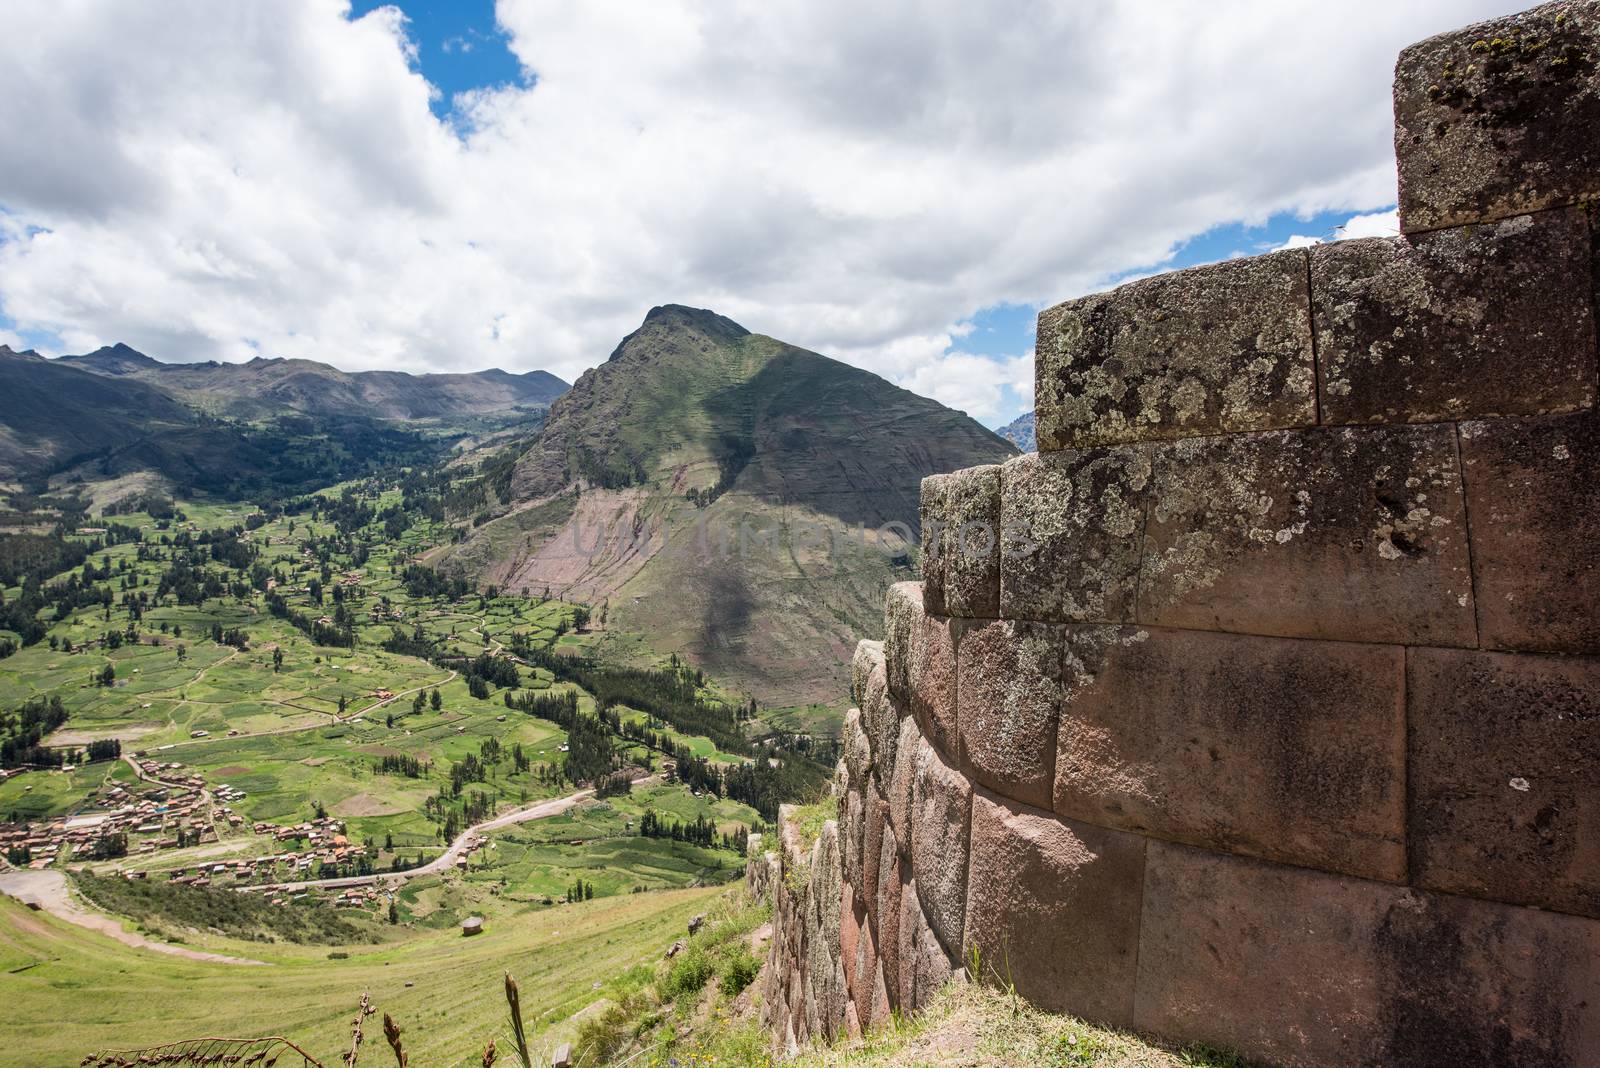 The Sacred Valley and the Inca ruins of Pisac